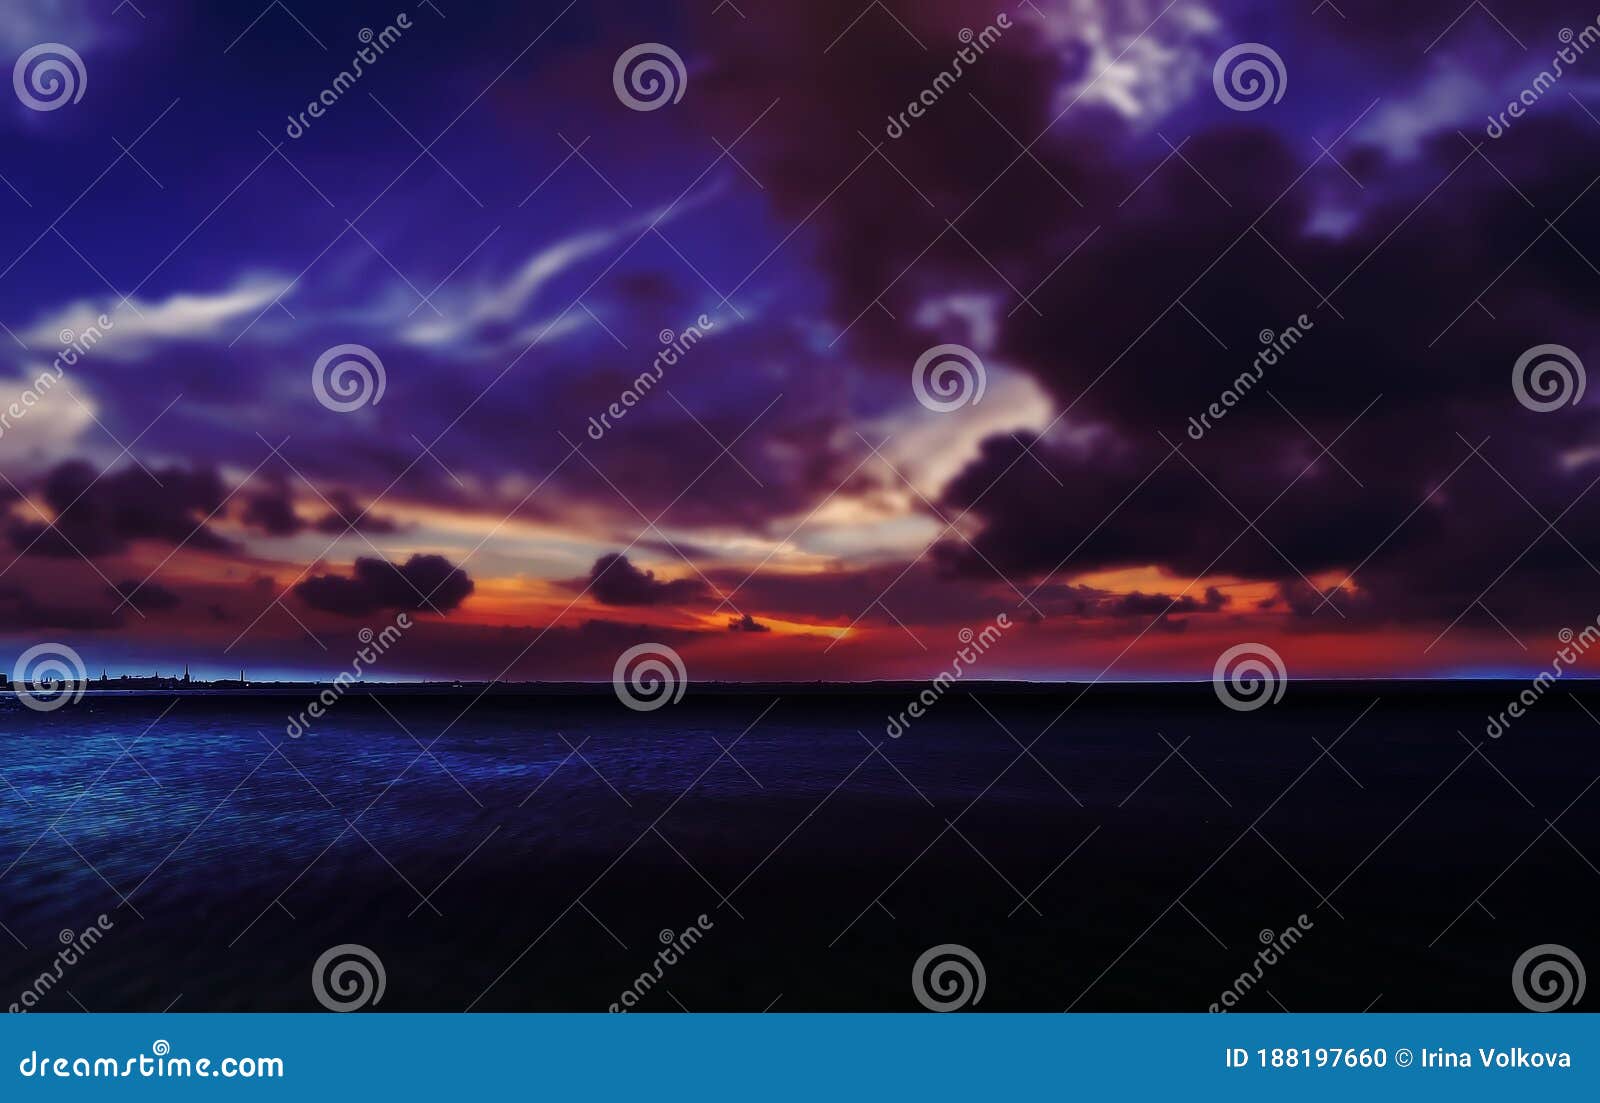 Dramatic Night Sky At Sea Blue Dark Ocean Water Wave And Blue Sky Dramatic Clouds Beautiful Nature Landscape Stock Photo Image Of City Landscape